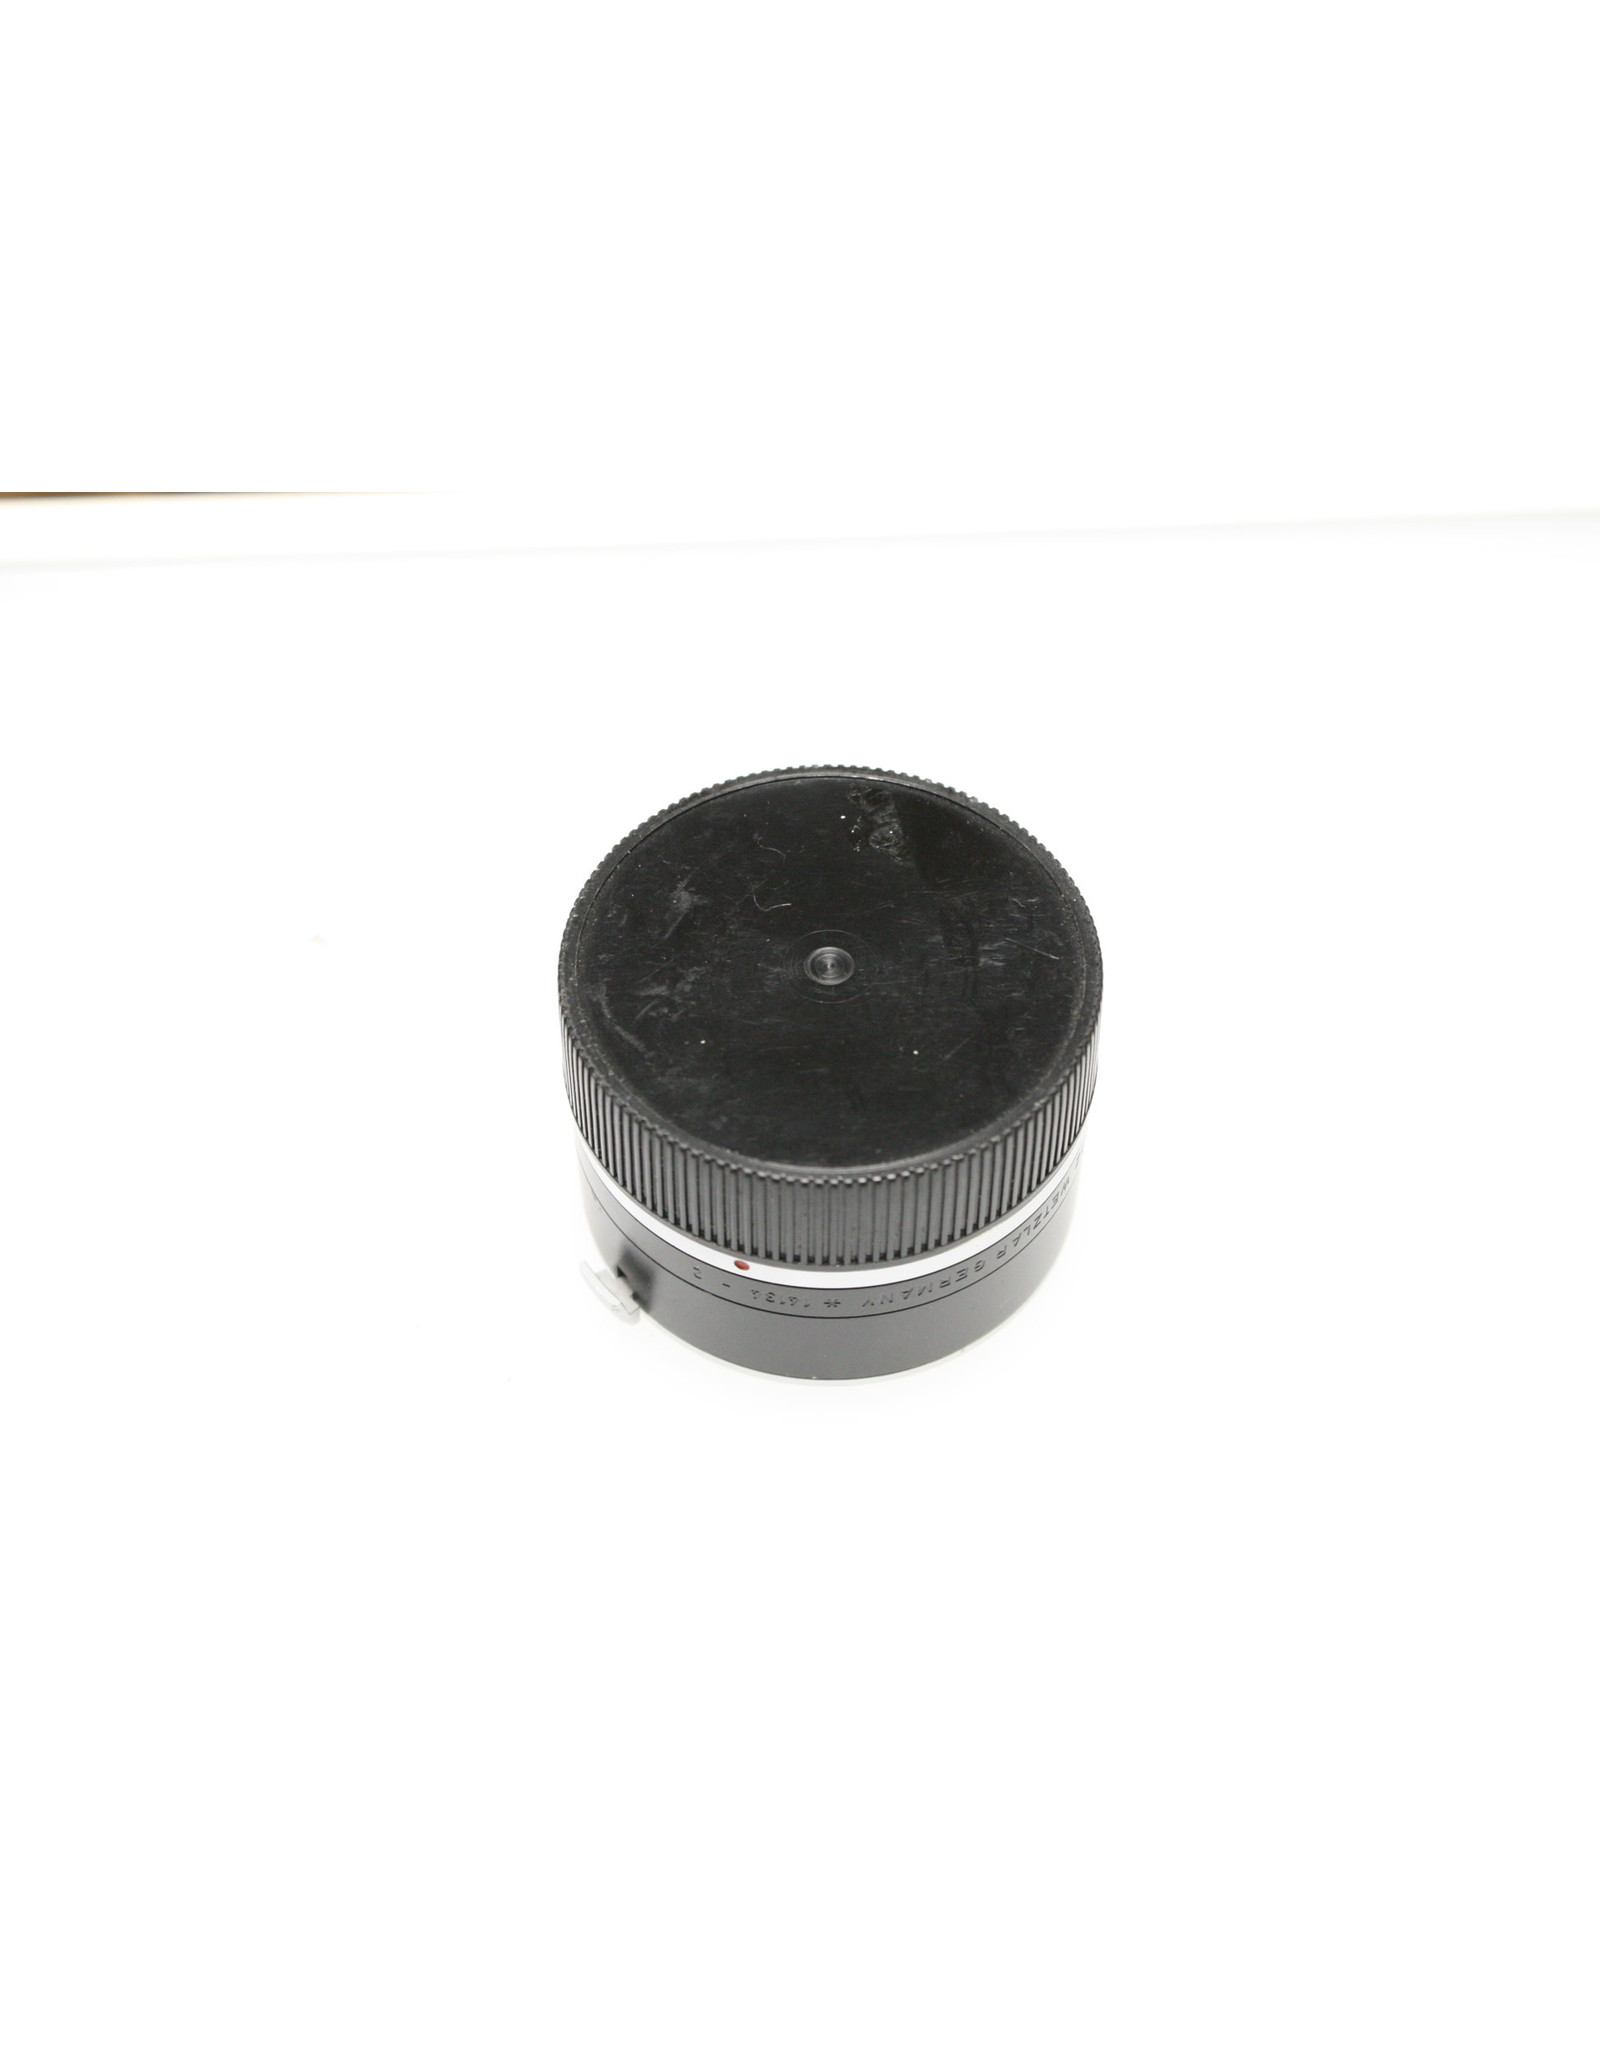 Leica Extension Tube 1 and 2 14134 For Leicaflex